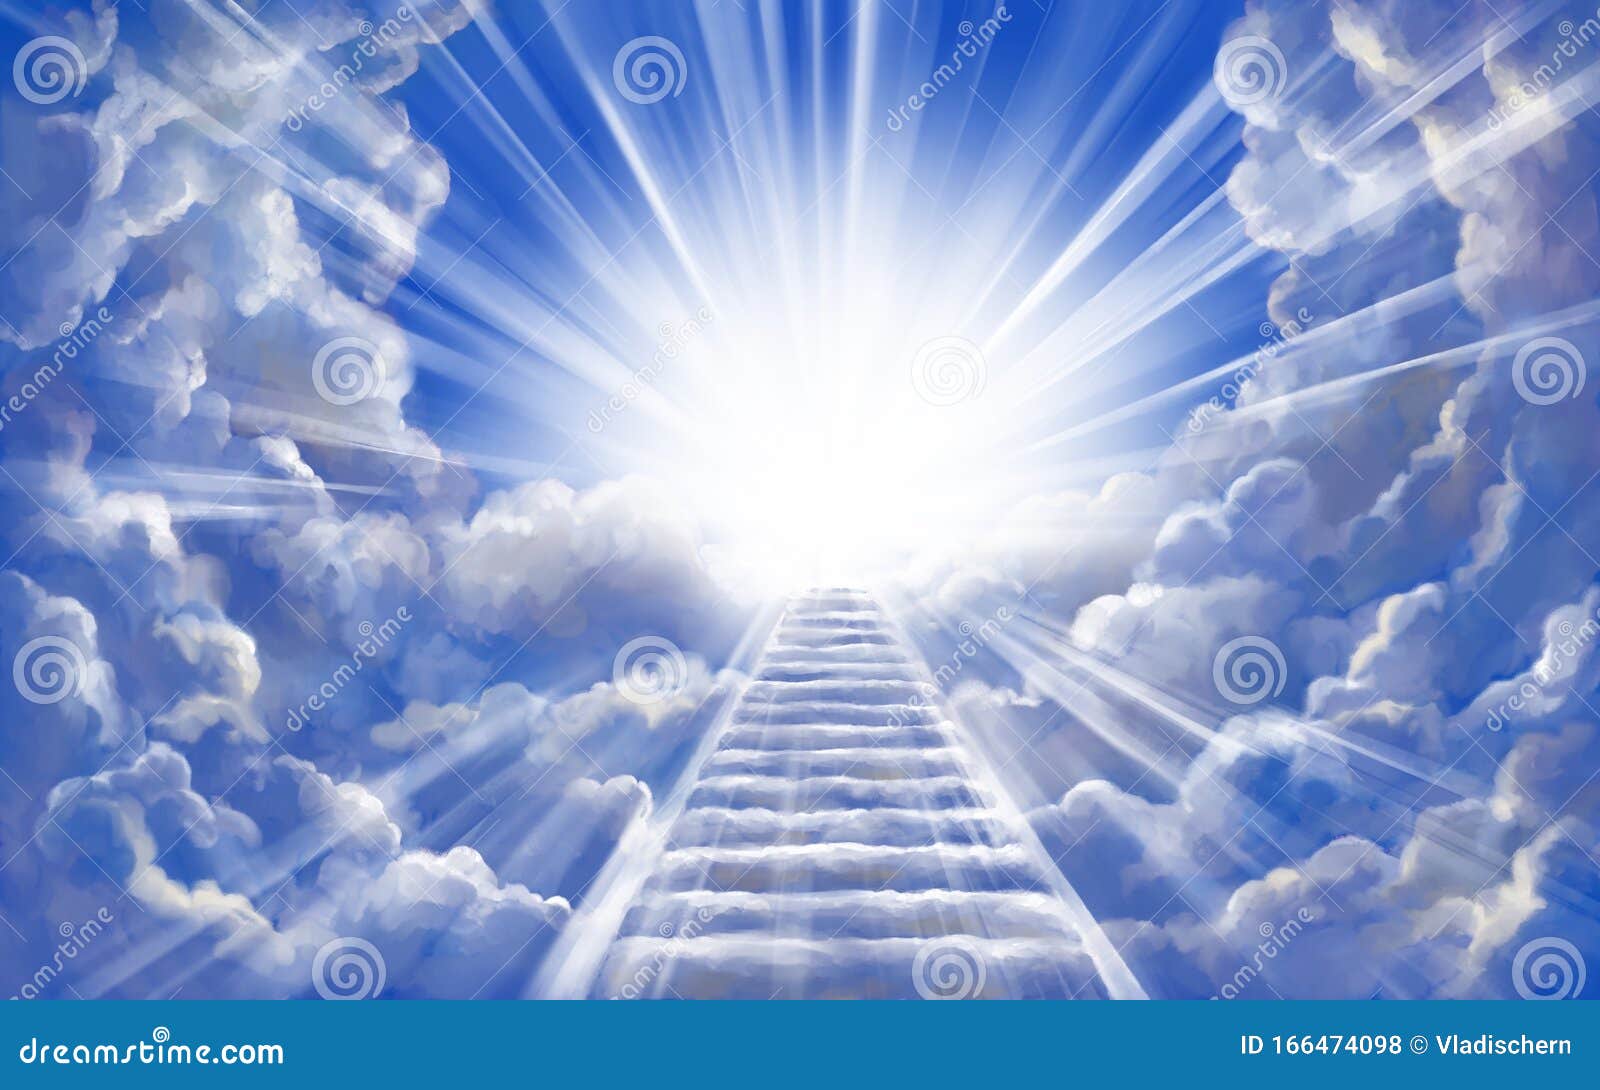 stairway to heaven in glory, gates of paradise, meeting god,  of christianity, art  painted with